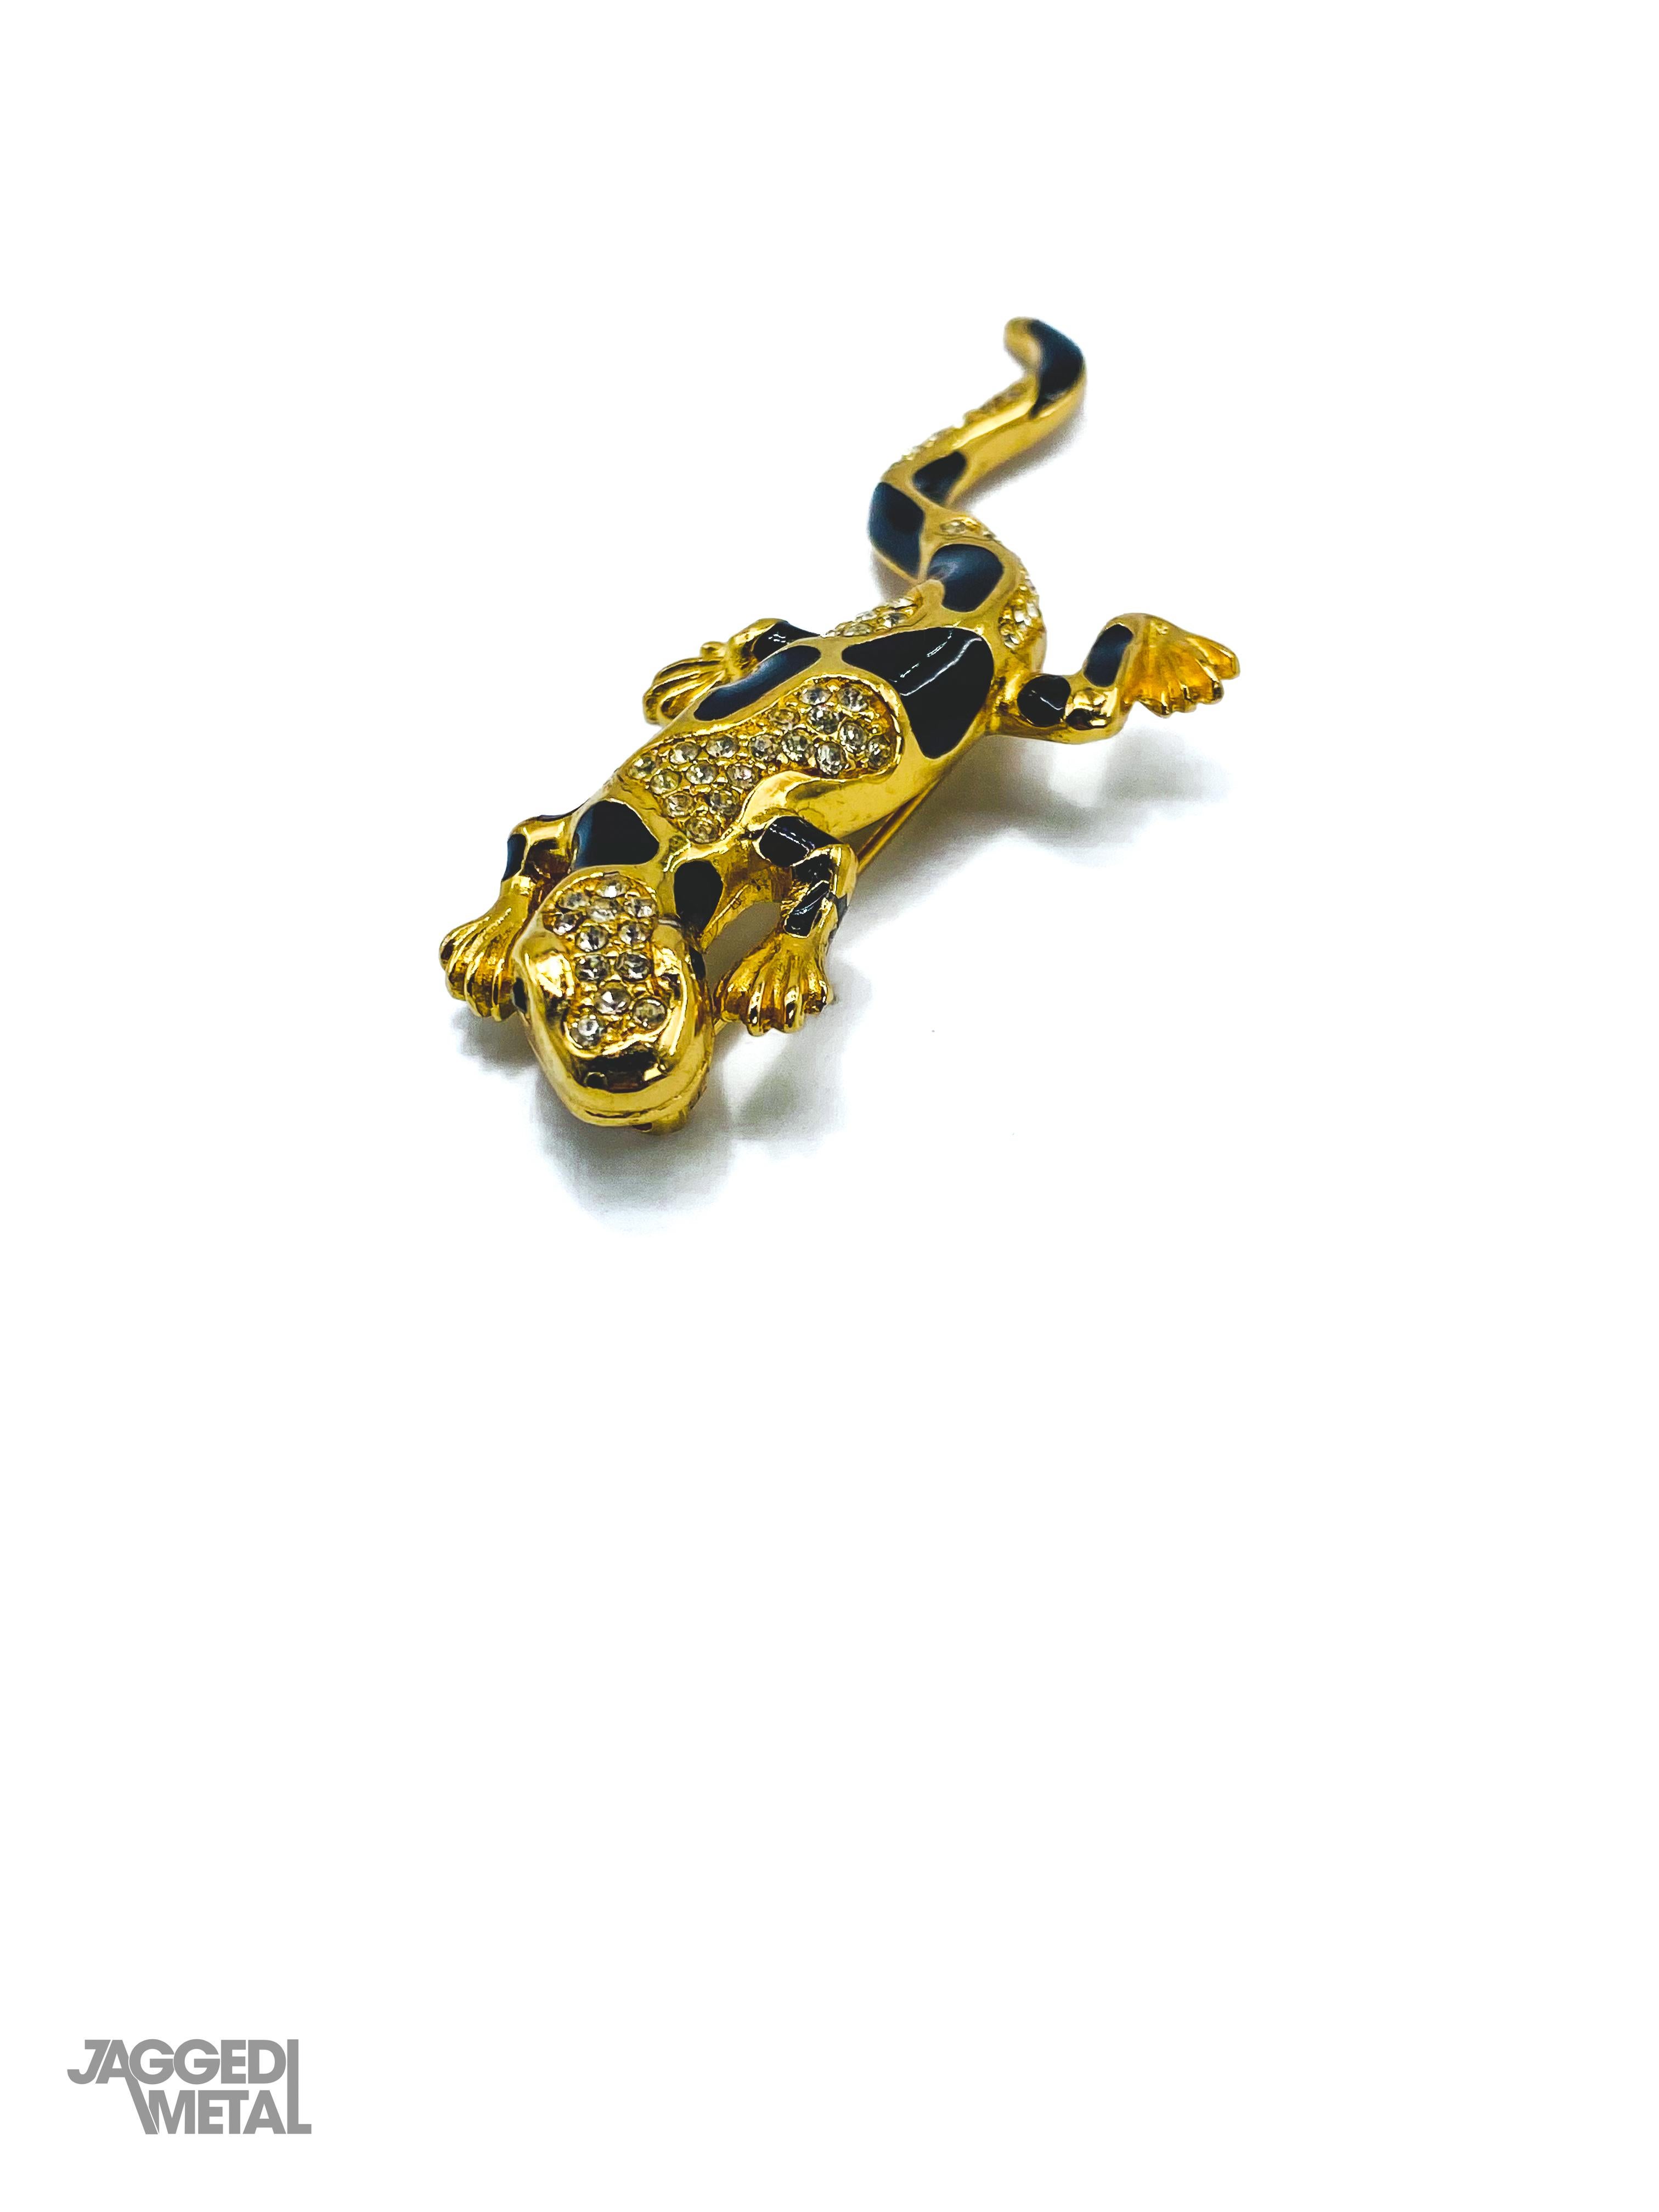 Christian Dior Vintage 1970s Salamander Brooch

Timelessly cool statement brooch - classic 80s Dior! 

Detail
-Made in Germany in 1970
-Crafted from gold plated metal, black enamel and Swarovski crystals

 Size & Fit
-Measures approx 1 1/4